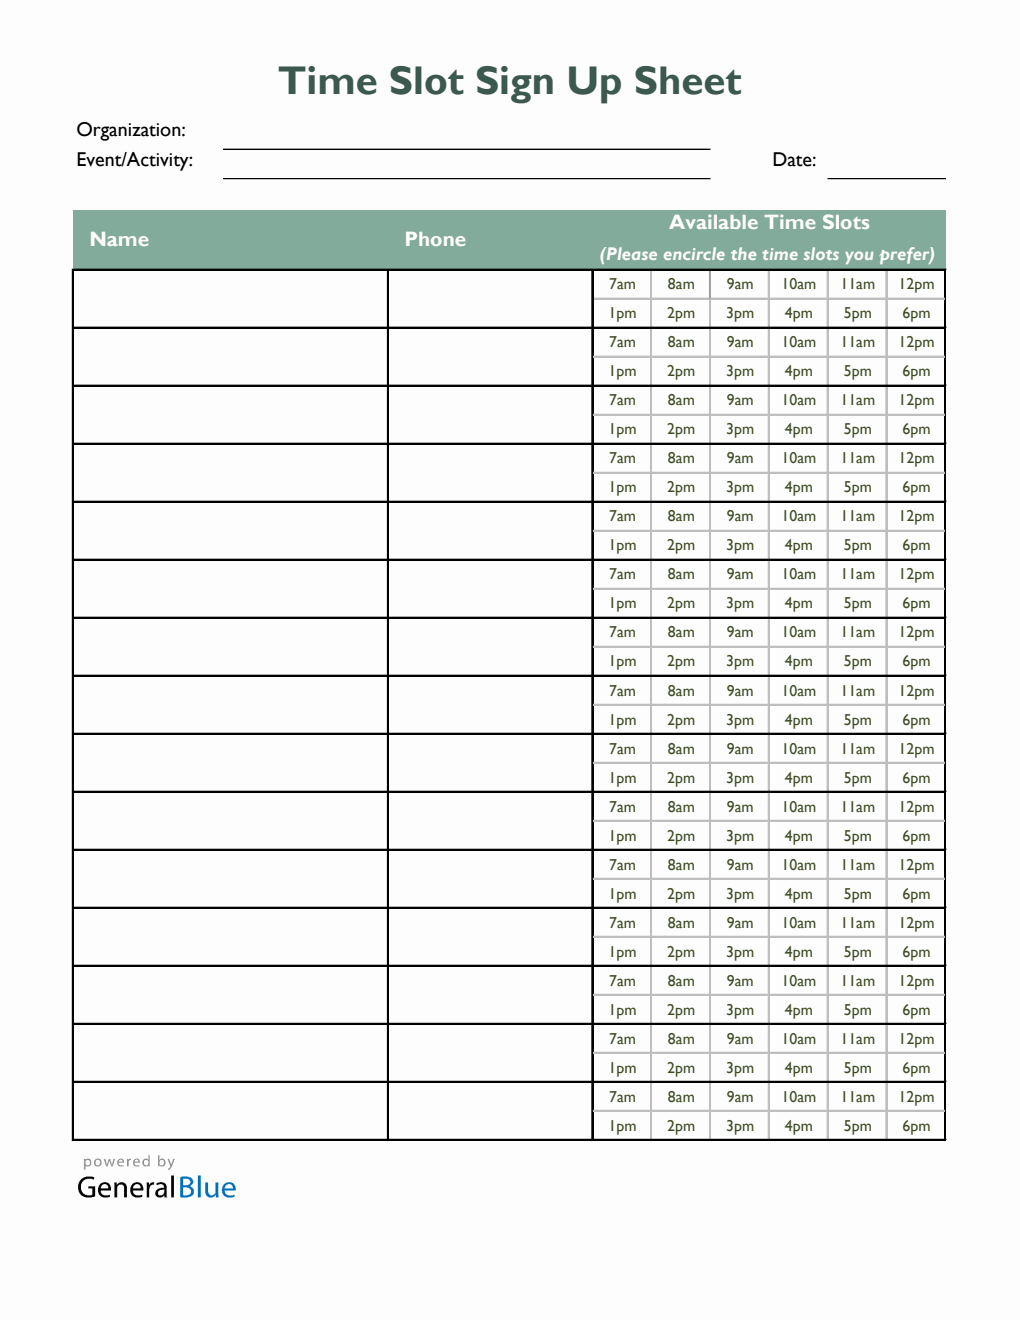 Time Slot Sign Up Sheet Template in Excel (Green)